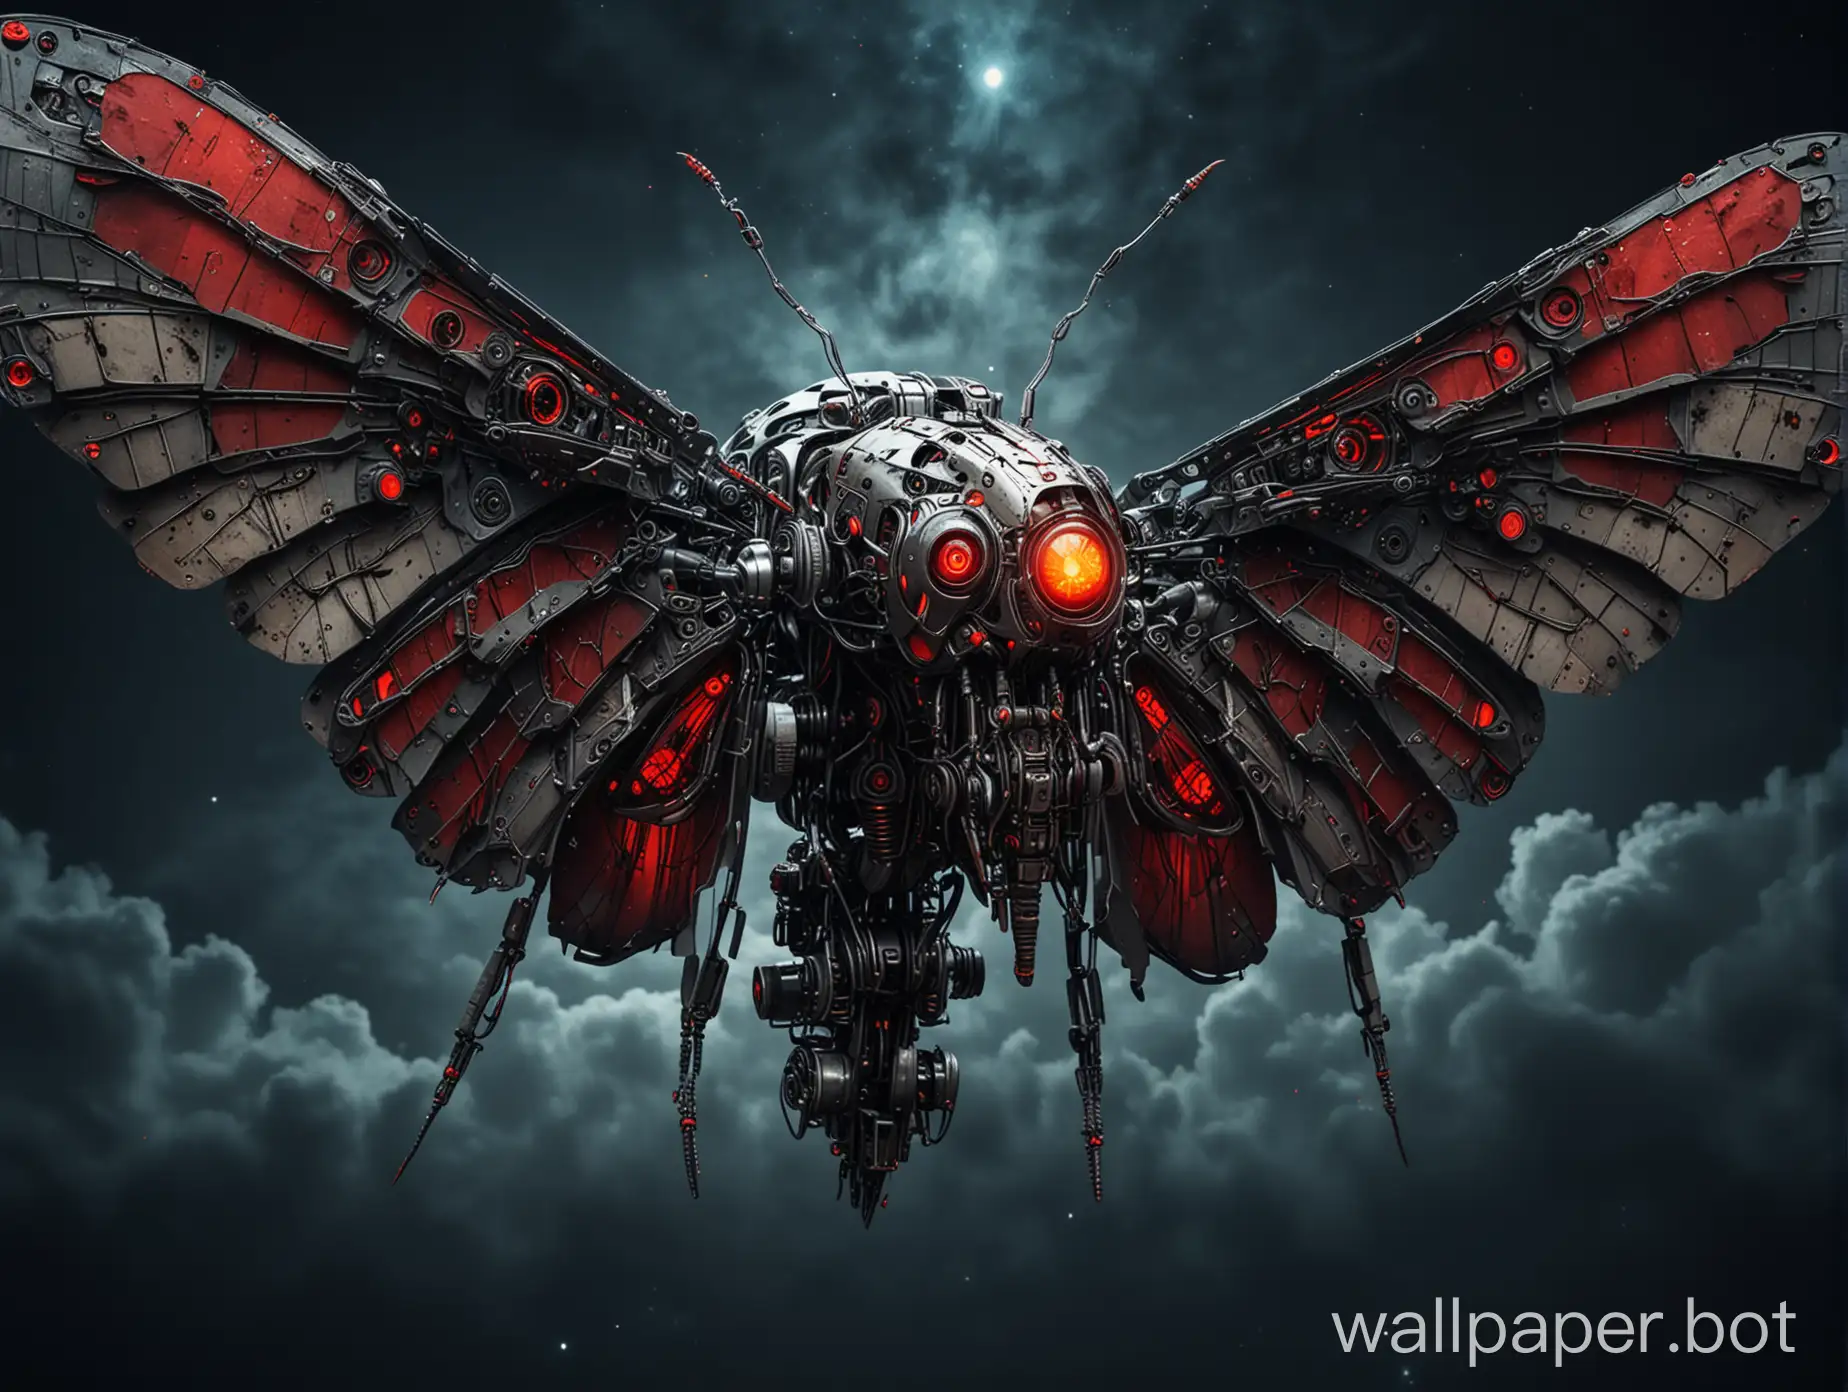 Mechanical robot moth with big wings, red eyes flying on night sky in cyberpunk style, dark background